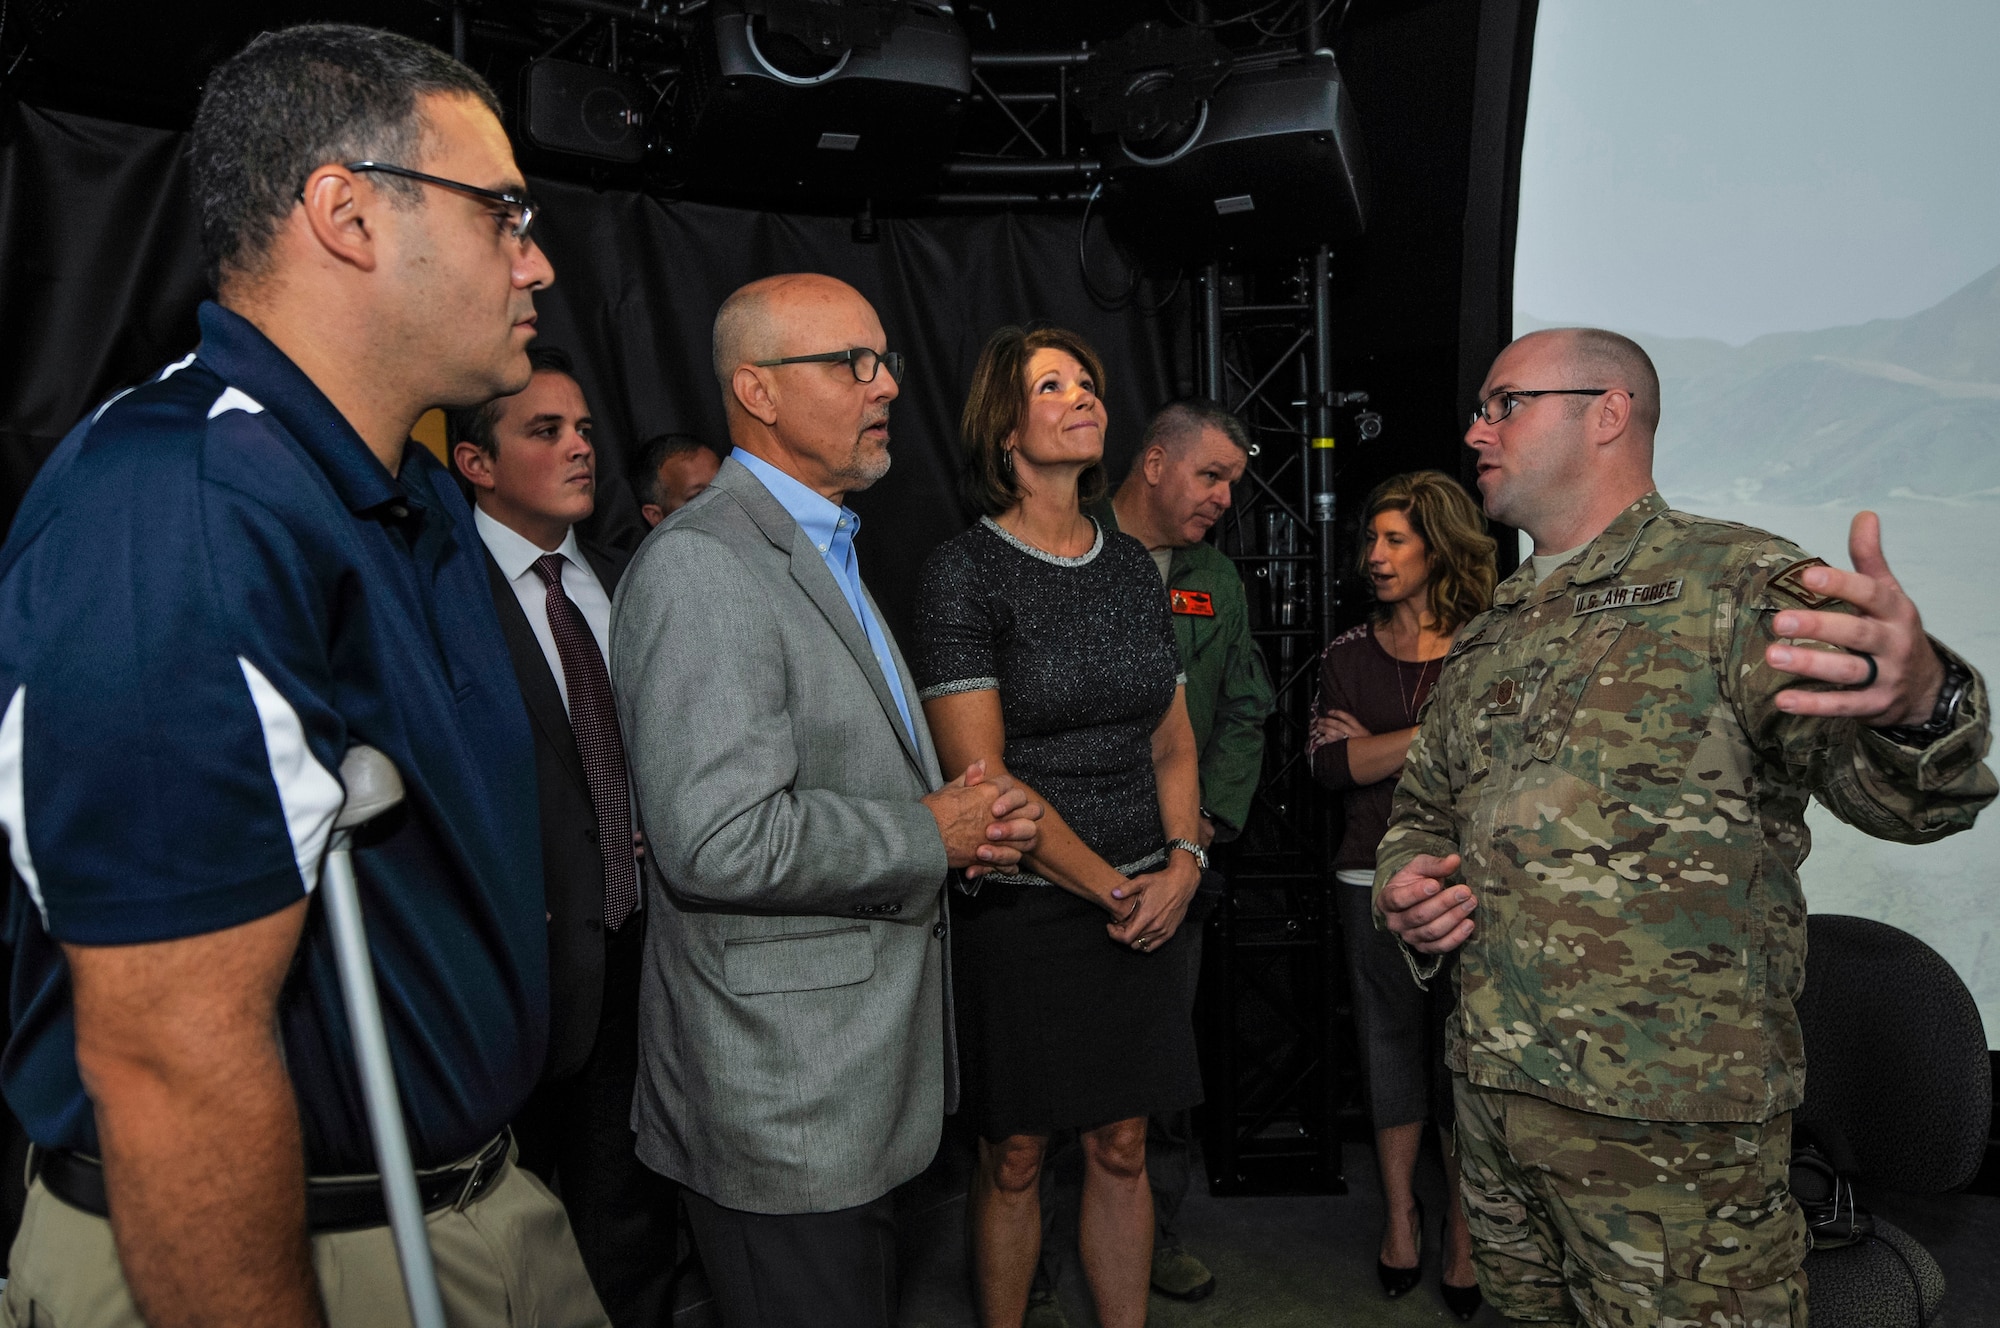 U.S. Air Force Master Sgt. Eric M. Dubois, operations superintendent at the 169th Air Support Operations Squadron, Illinois Air National Guard, explains to, from left, state Rep. Michael Unes, R-East Peoria., state Sen. David Koehler, D-Peoria., and U.S. Rep. Cheri Bustos, D-Ill., how the Air National Guard Advanced Joint Terminal Attack Controller Training System works after a ribbon cutting ceremony at the 182nd Airlift Wing in Peoria, Ill., Oct. 5, 2015. Peoria’s 169th Air Support Operations Squadron TACPs teamed up with the QuantaDyn Corporation to help create the AAJTS, which is expected to potentially save the government $95 million through fiscal year 2018 by reducing the cost of qualification and continuation training by 48 percent. (U.S. Air National Guard photo by Staff Sgt. Lealan Buehrer/Released)